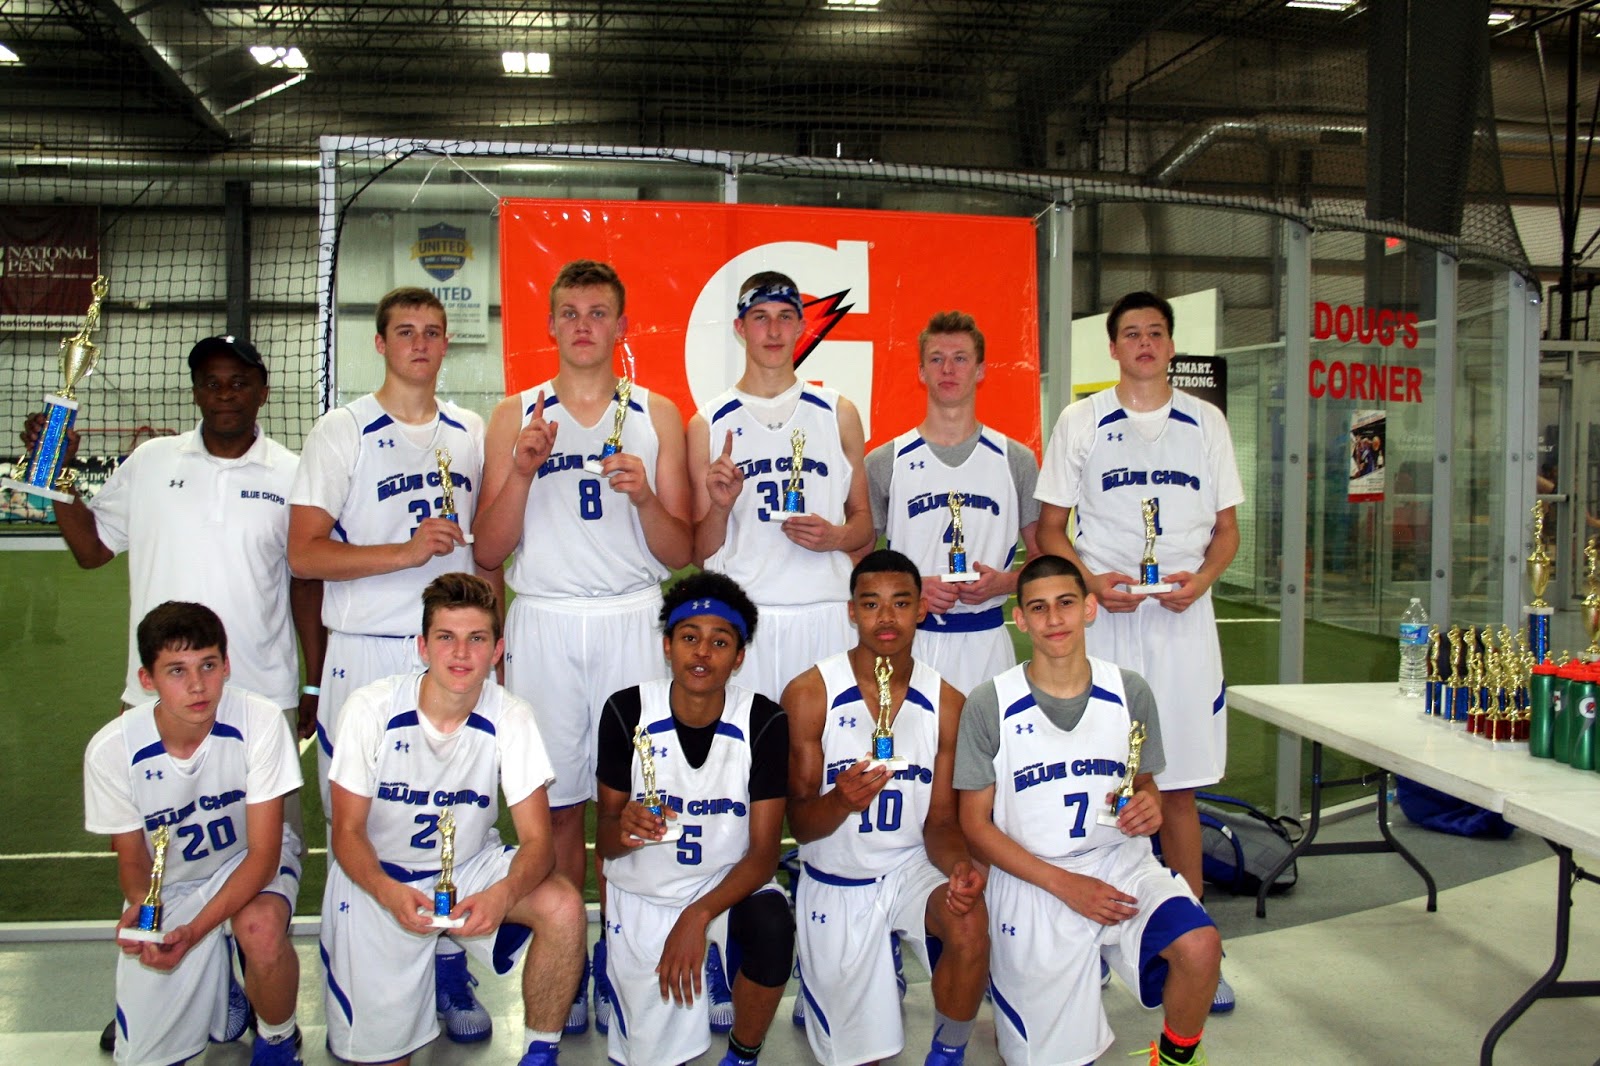 The Lehigh Valley Blue Chips are a dream team of 8th and 9th graders who pl...